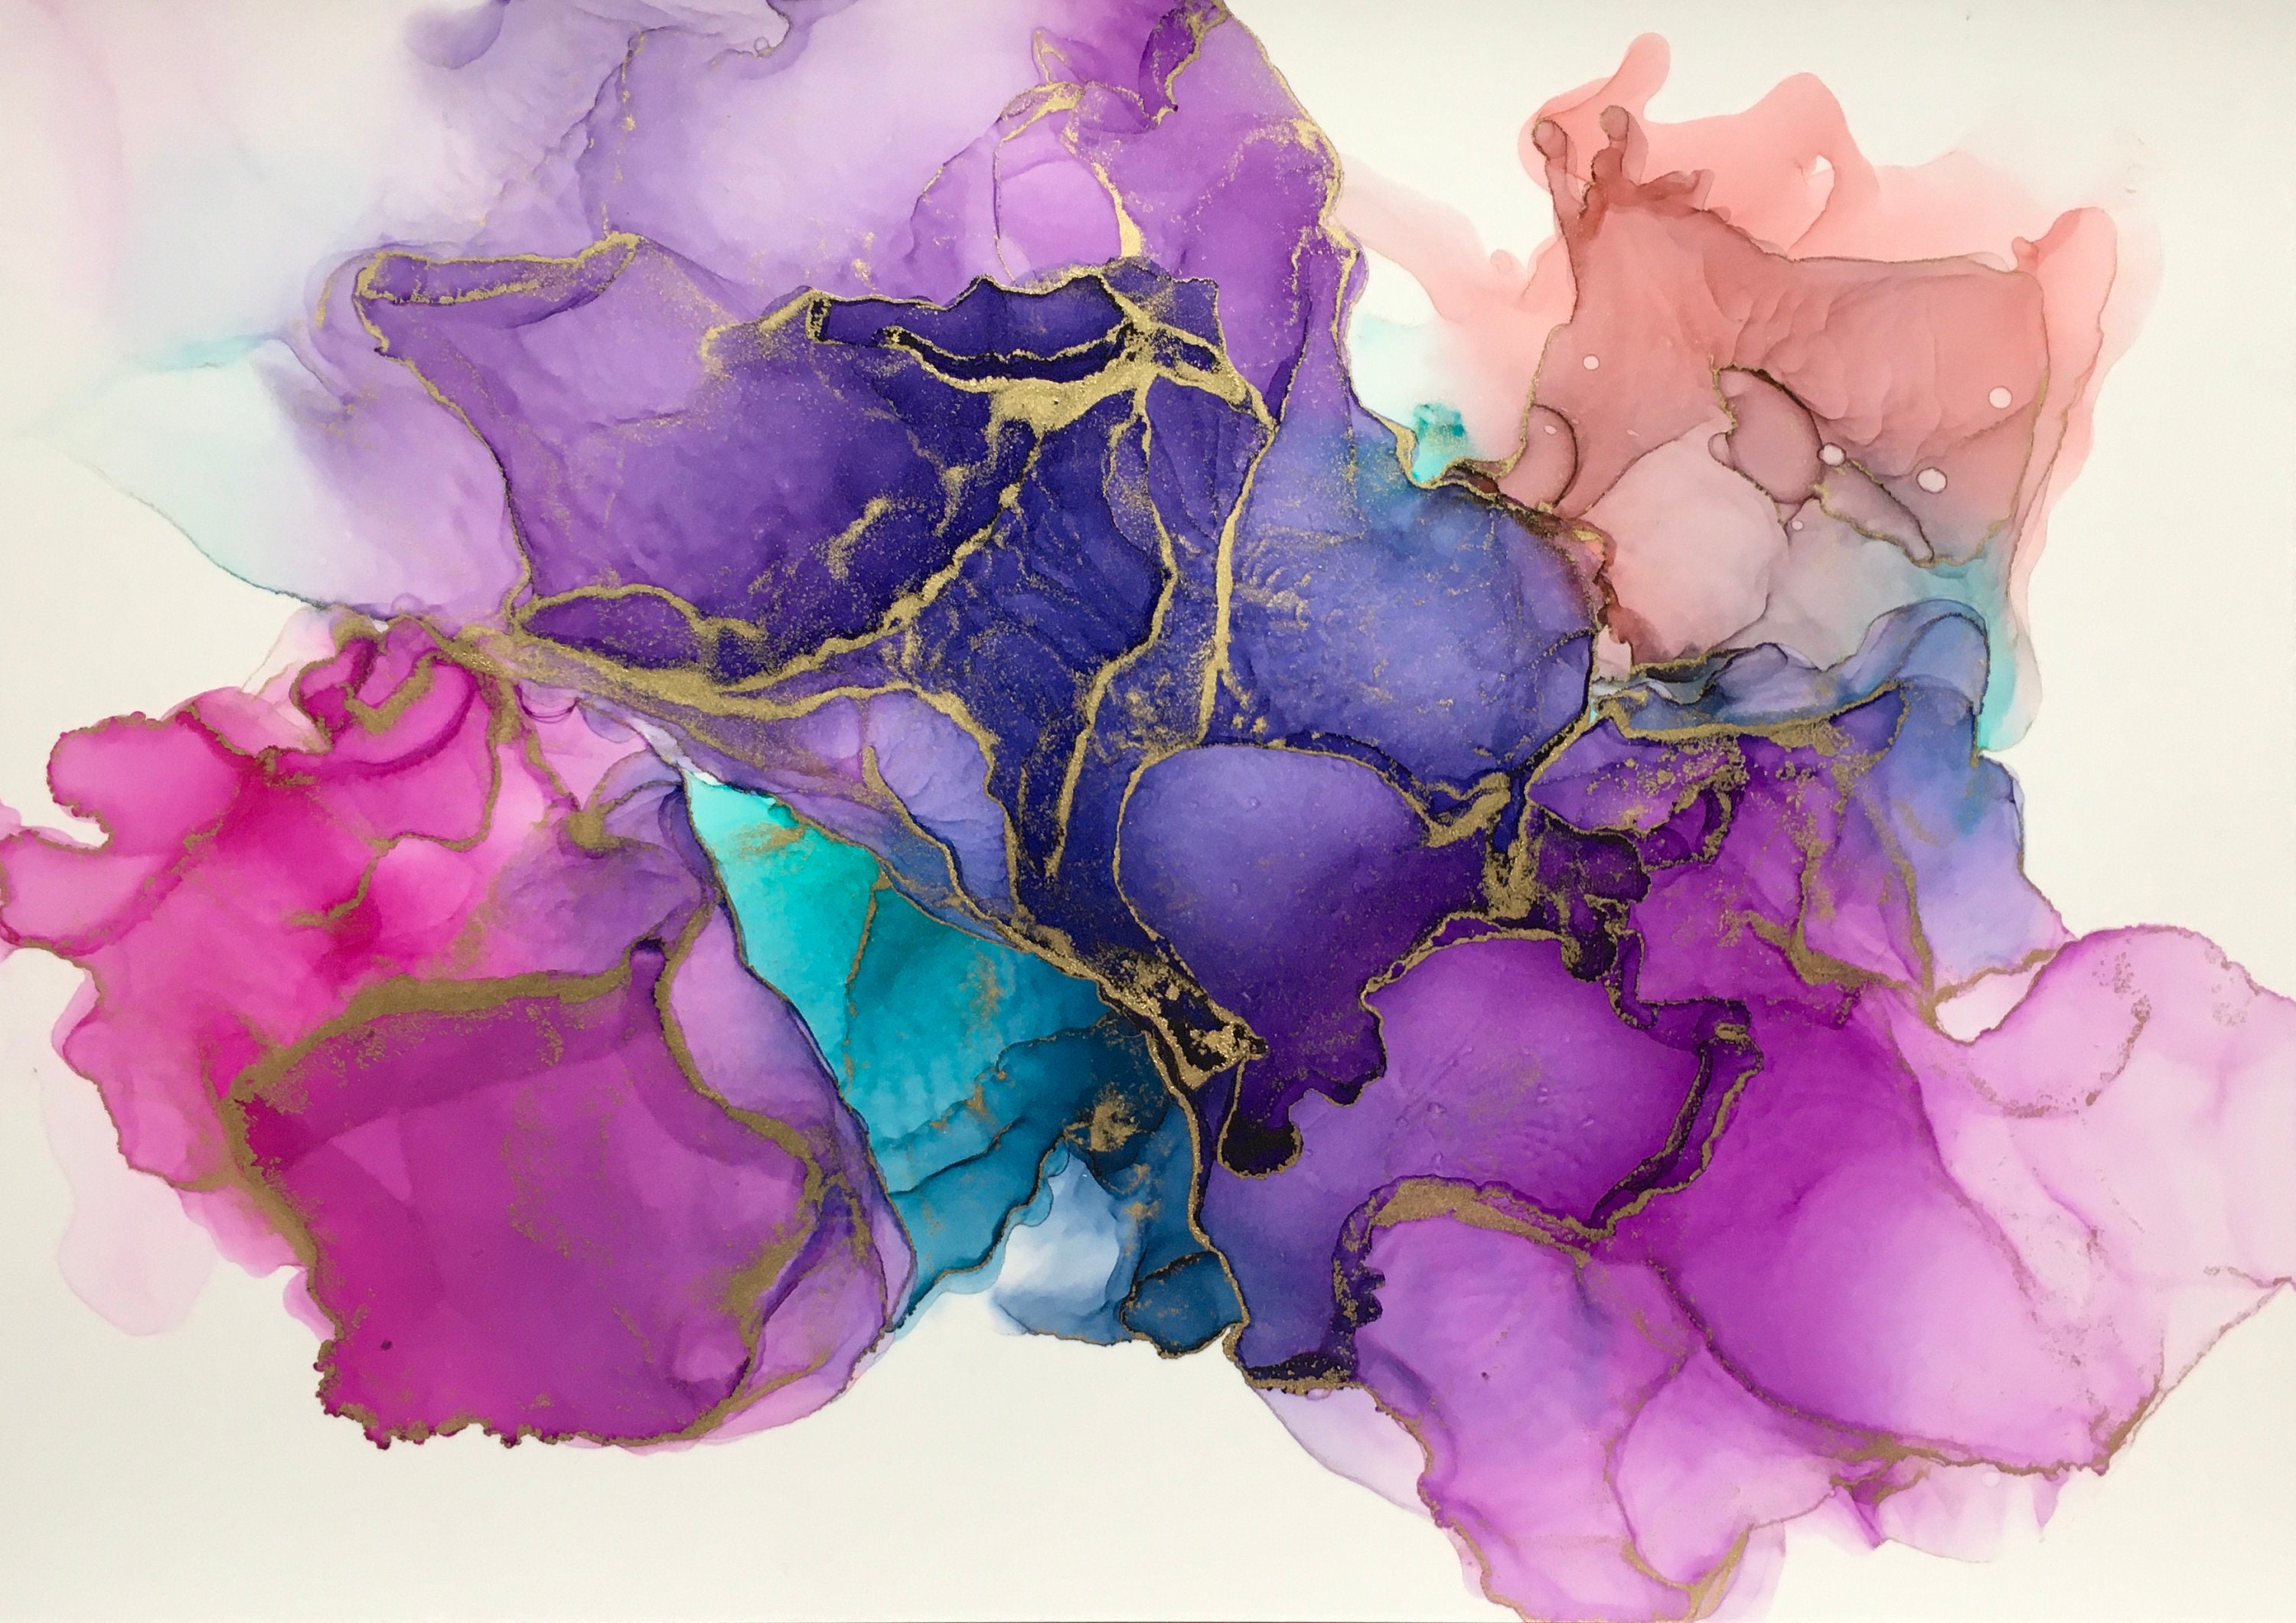 Abstract Art with Alcohol Ink Archives - Alcohol Ink Art Community